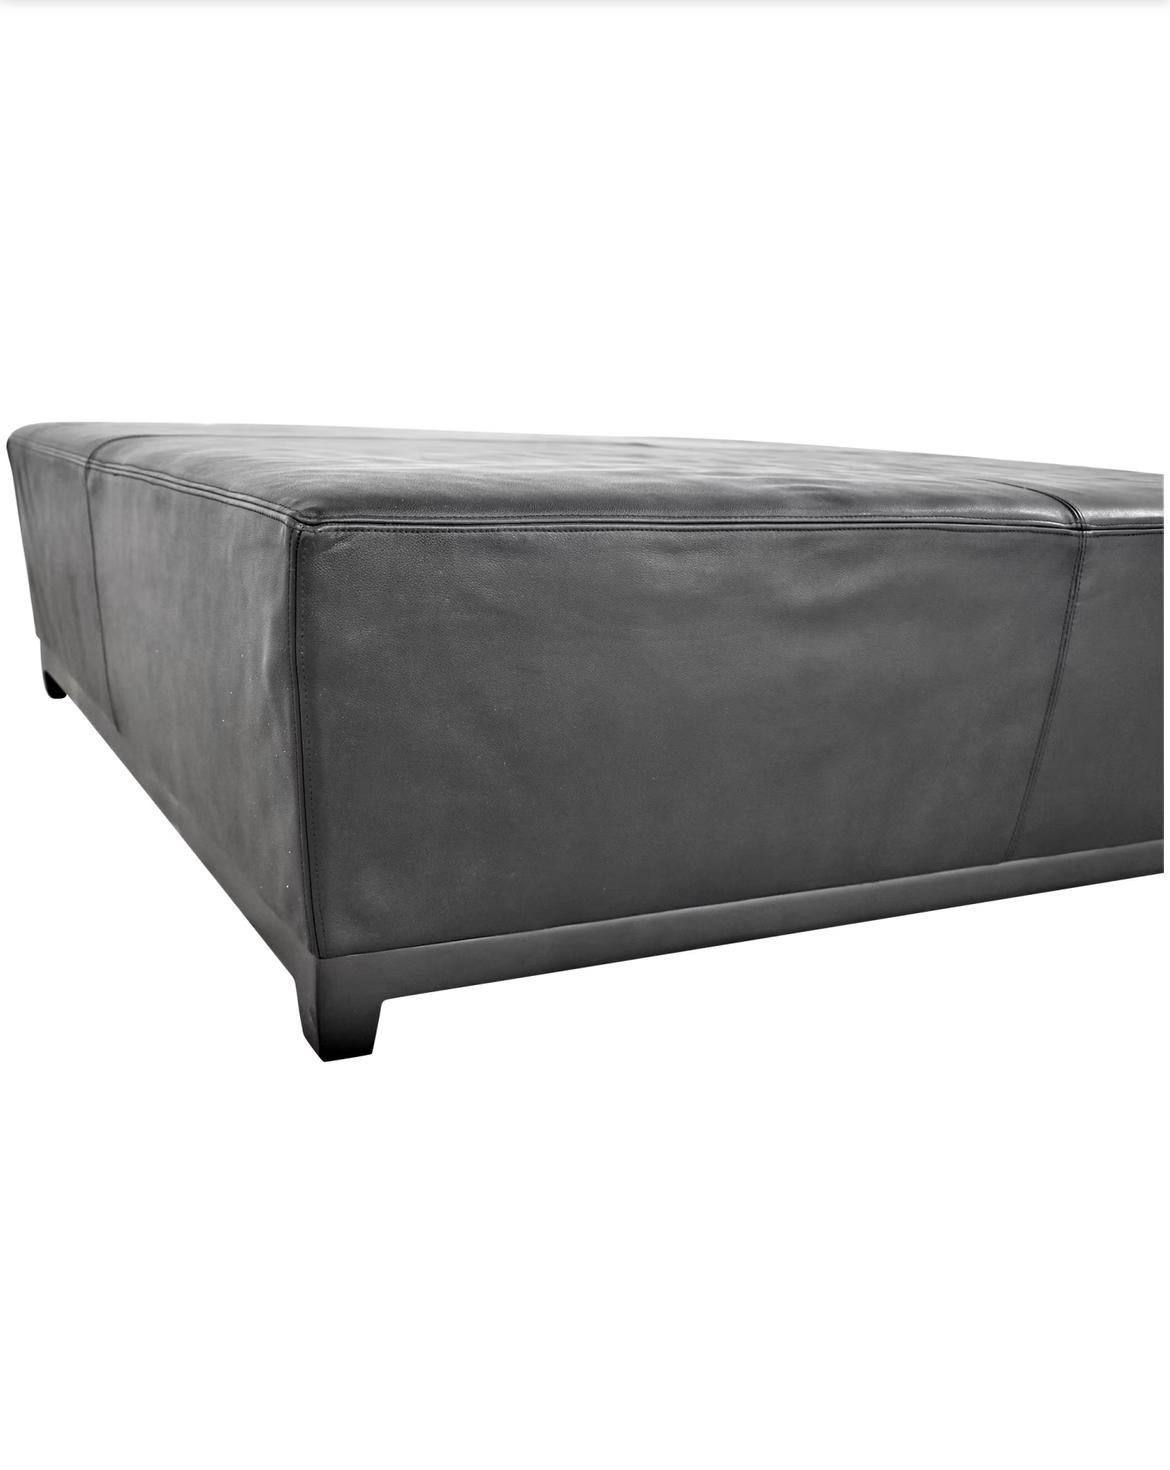 American Christian Liaigre for A. Rudin Square Cocktail Ottoman For Sale